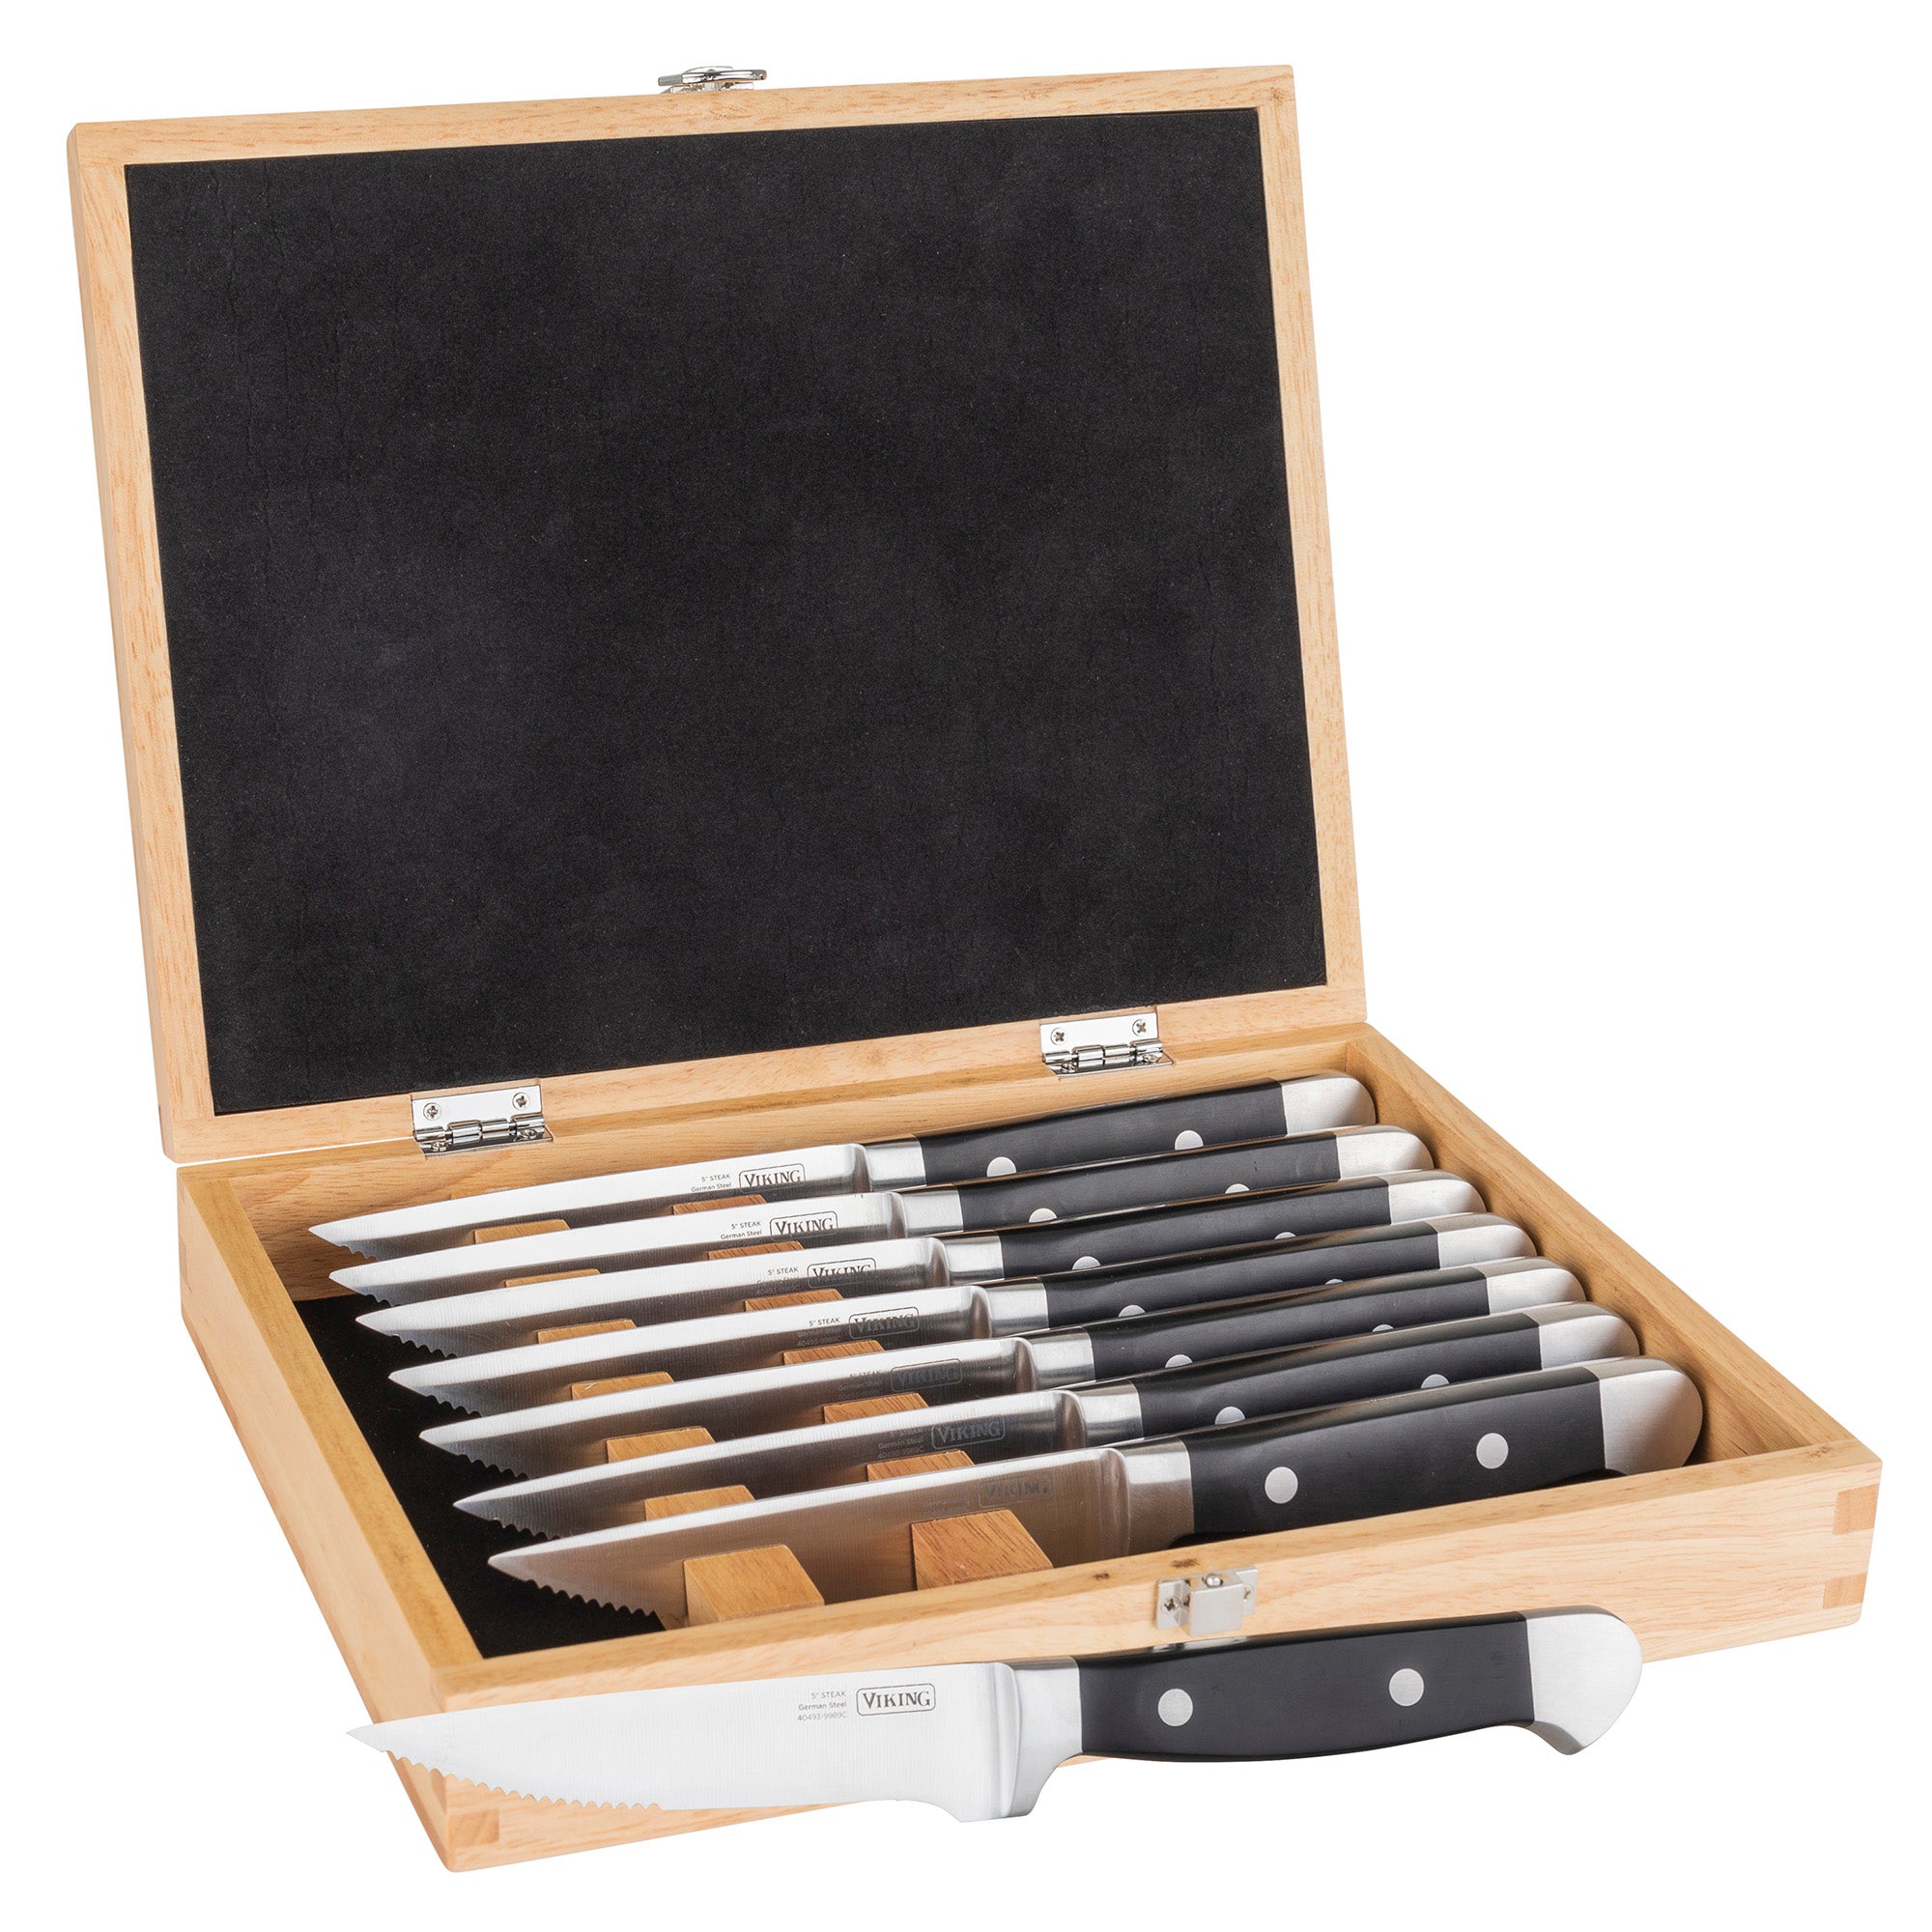 Steak Knives Wooden Handle Serrated Knife Set 8 box Wood Stainless Steel